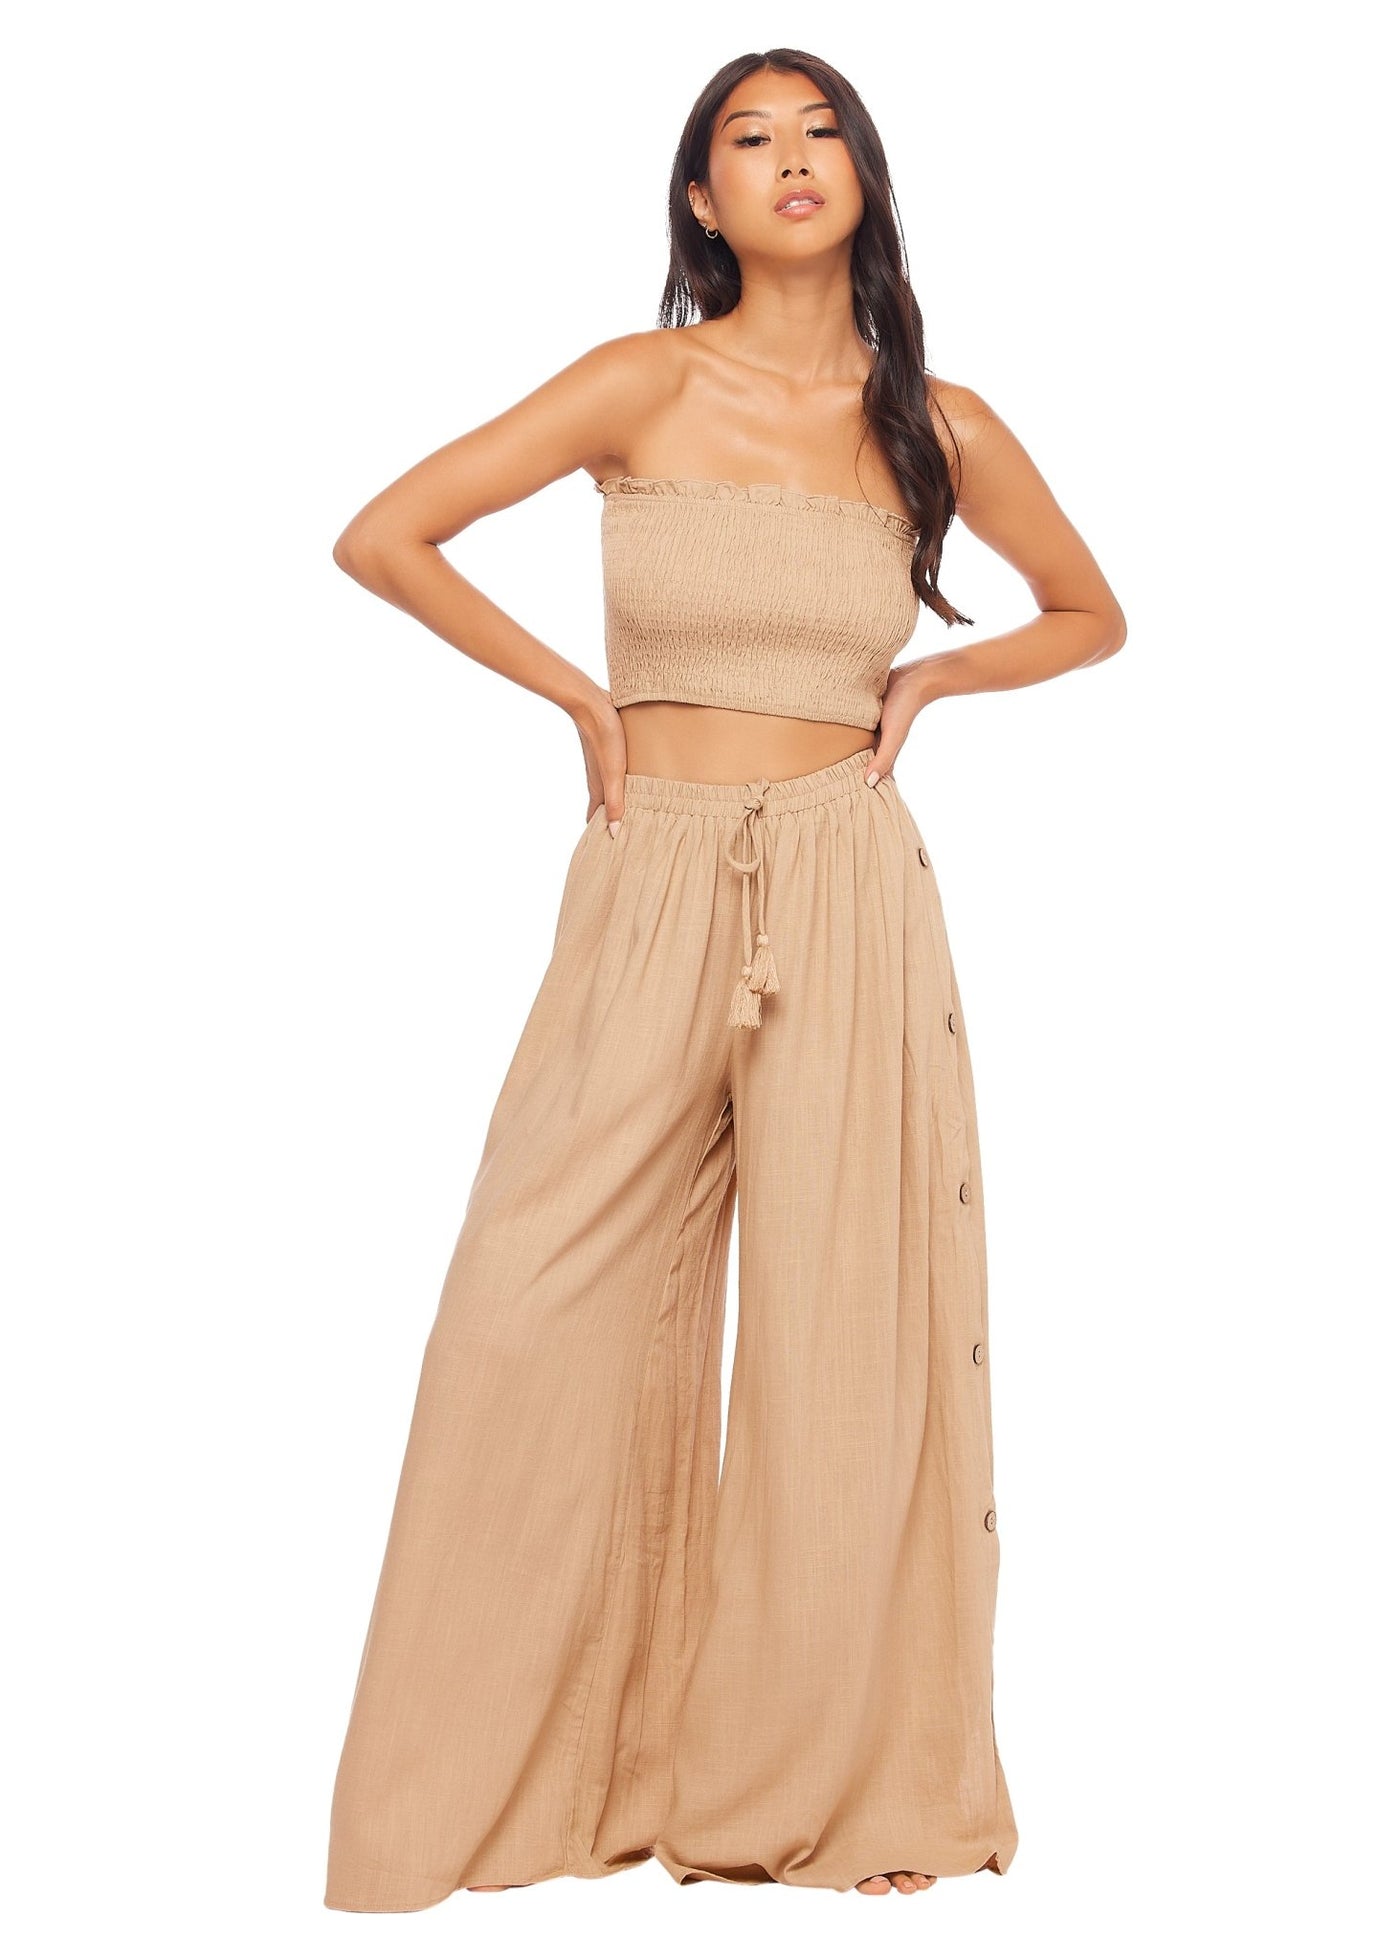 Tube Top and Pant Set Camel - Matching Sets | JMP The Label